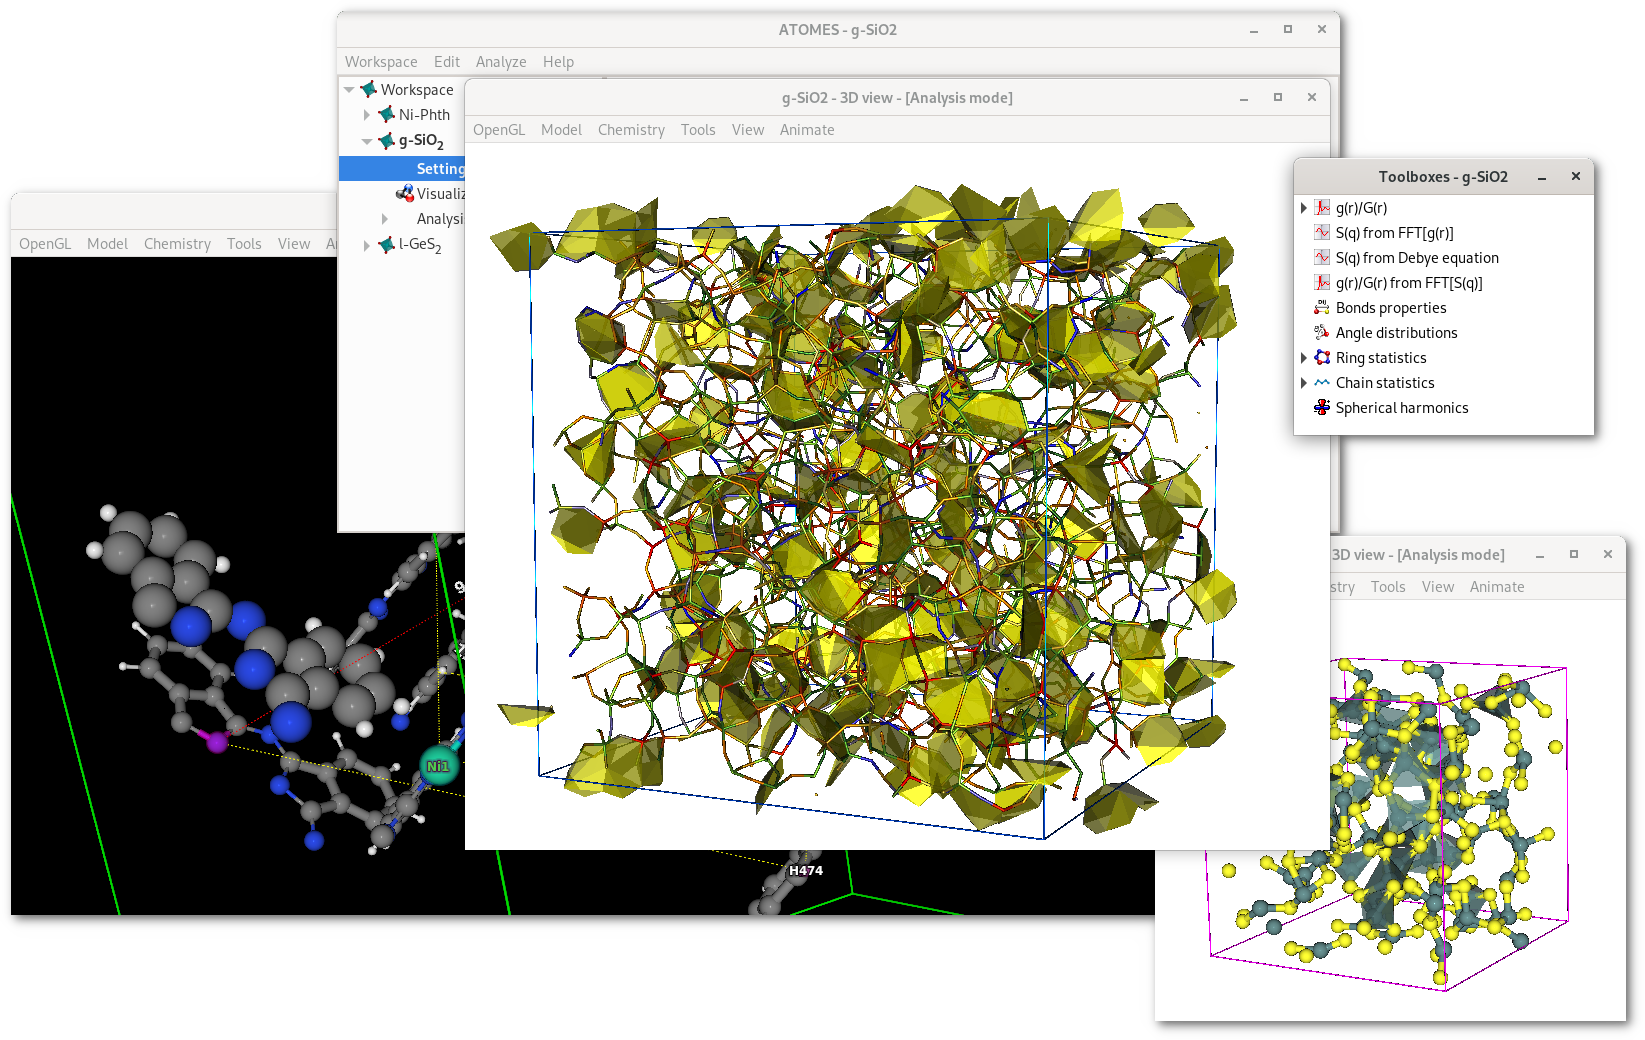 Example workspace to illustrate the visualization capabilities of the Atomes program containing 3 projects, named "Ni-Phth", "g-SiO_2" and "l-GeS_2".